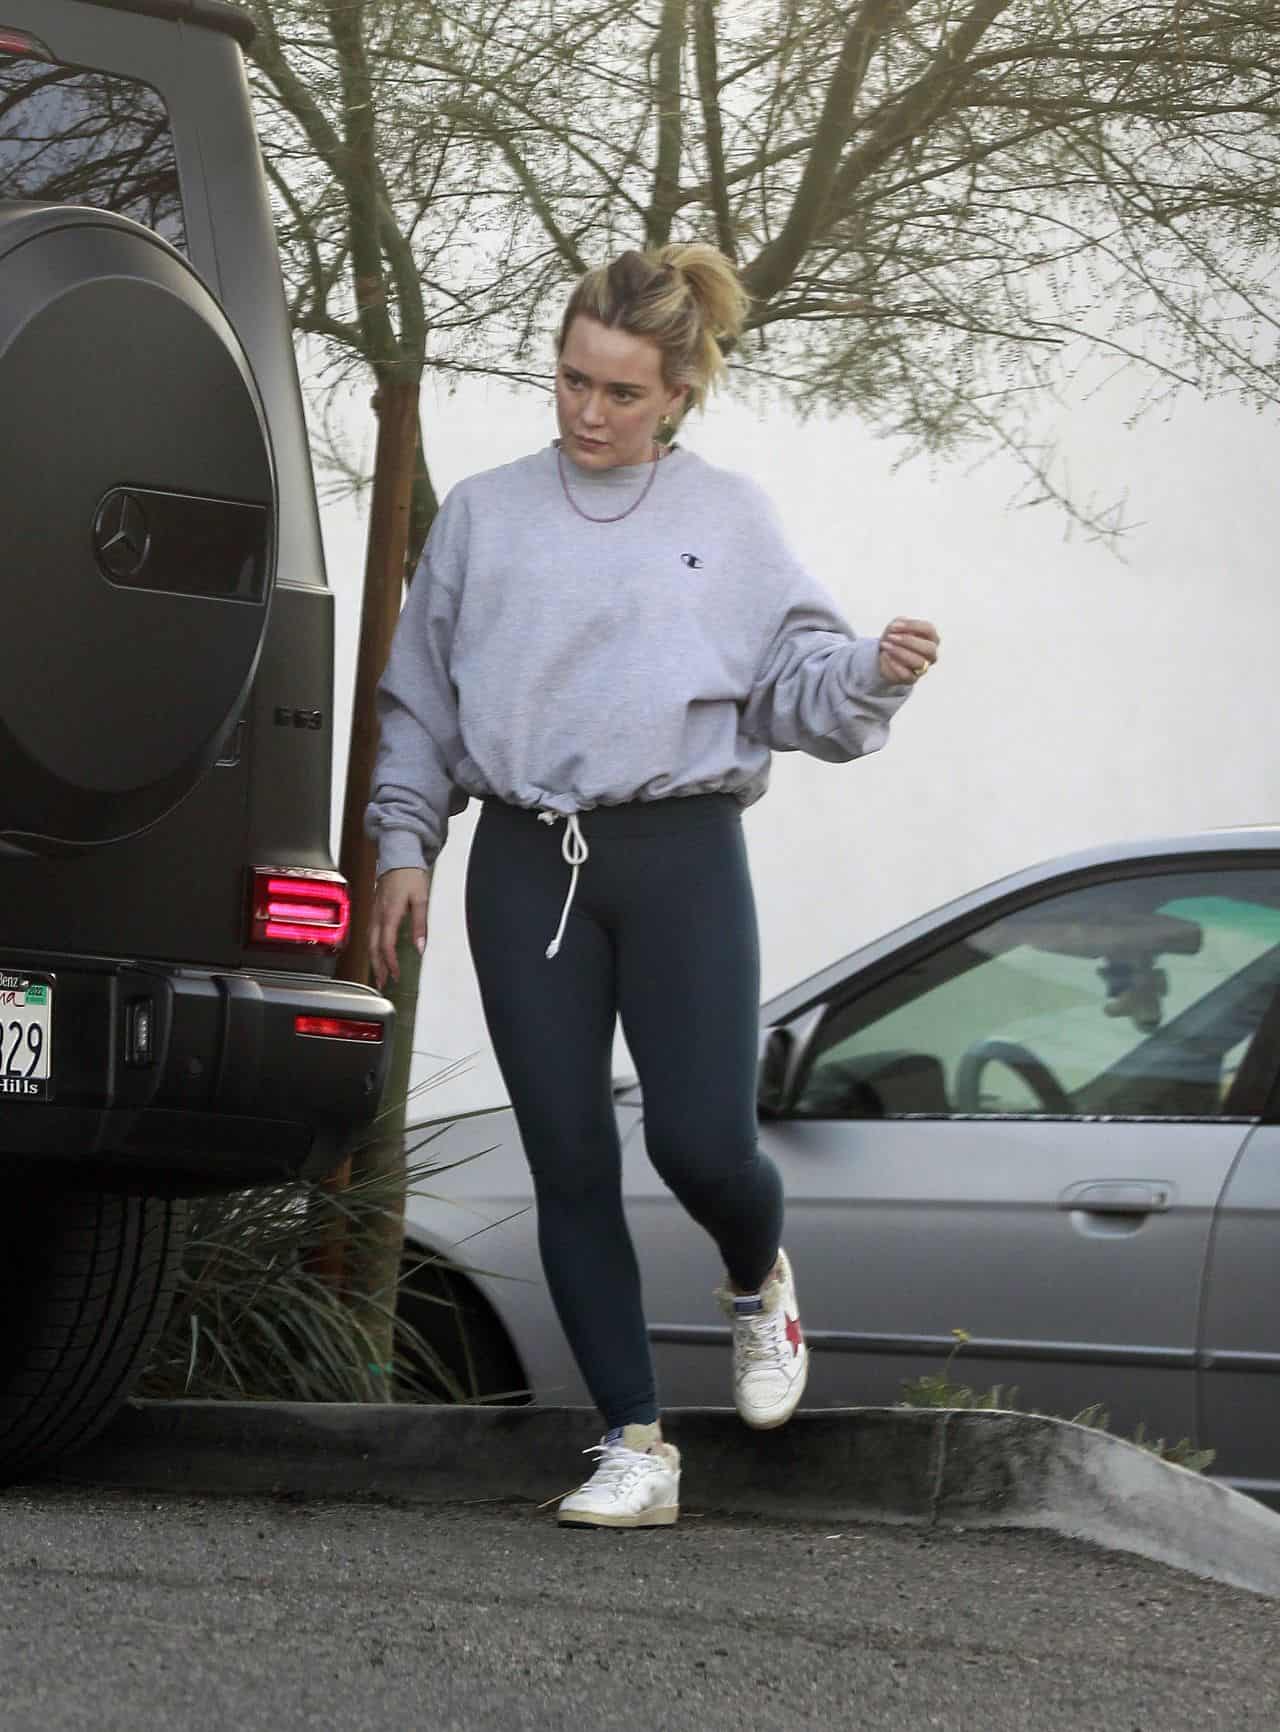 Hilary Duff was Energetic in Tight Leggings as she Ran Errands in the City